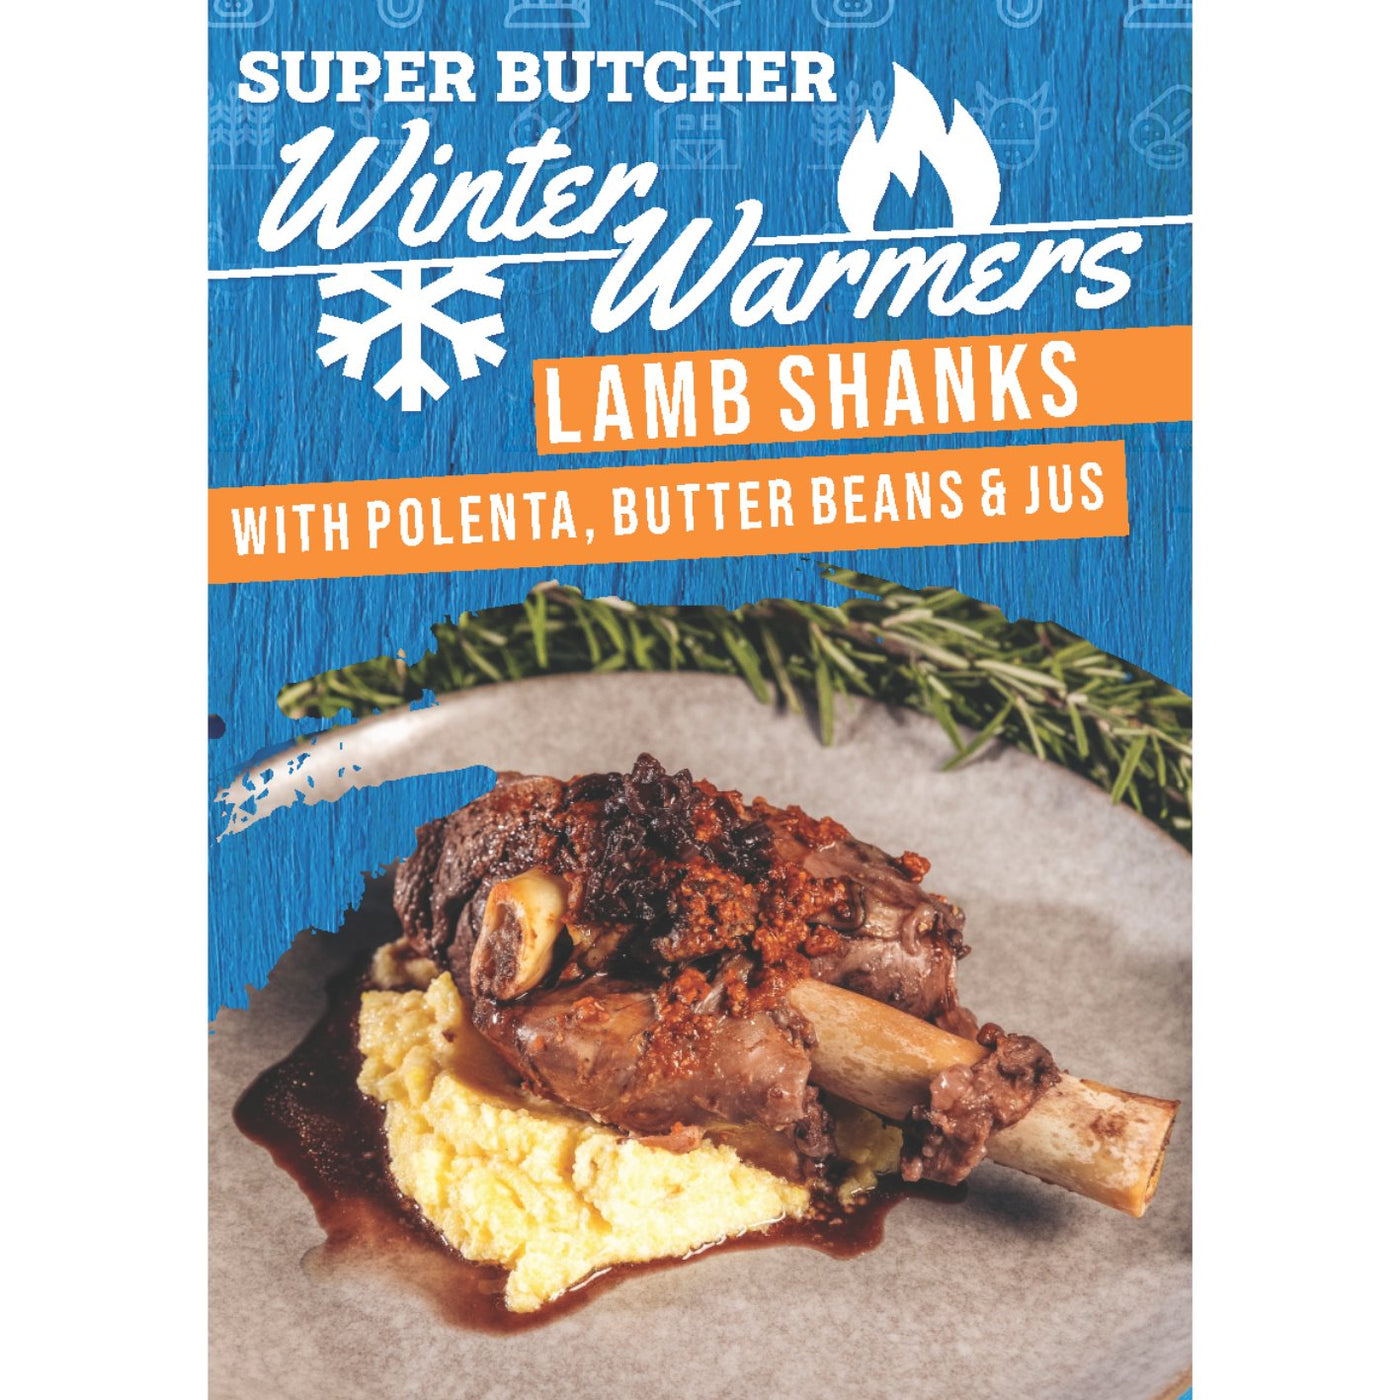 Lamb Shanks with Polenta, Butter Beans & Jus Recipe Card